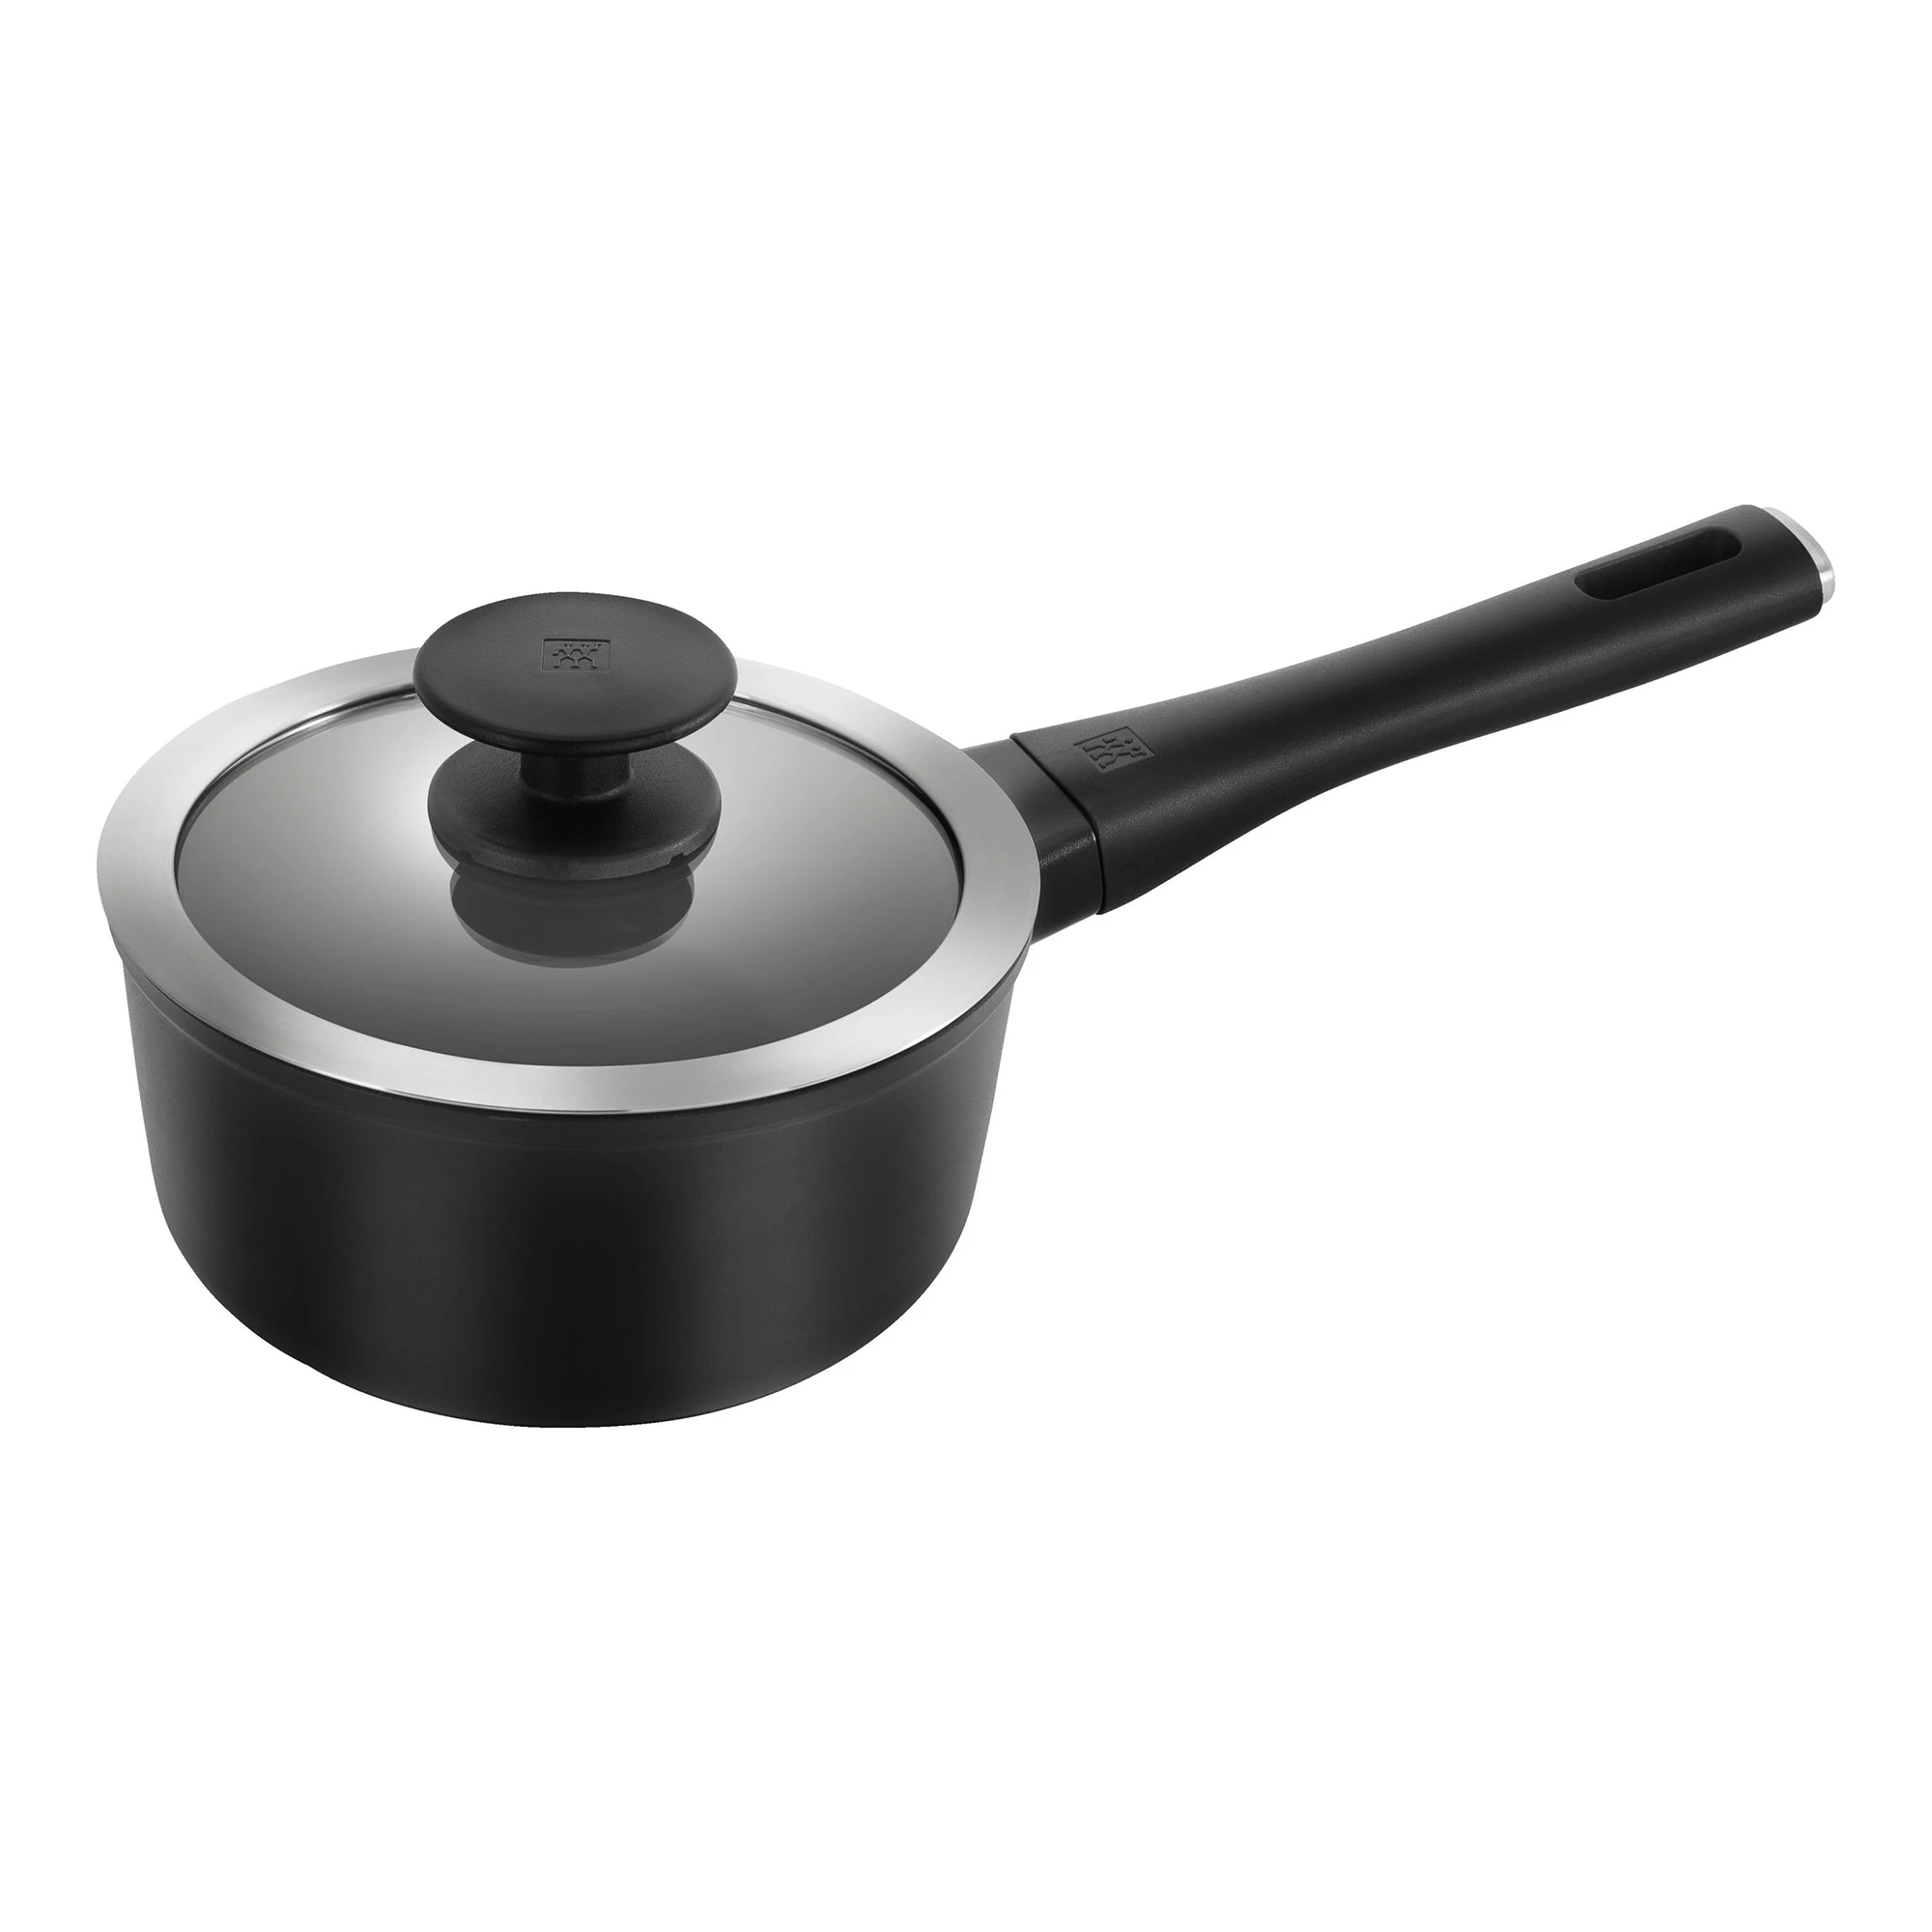 https://www.homethreads.com/files/zwilling/1021440-zwilling-madura-plus-forged-15-qt-aluminum-nonstick-saucepan-with-lid.webp